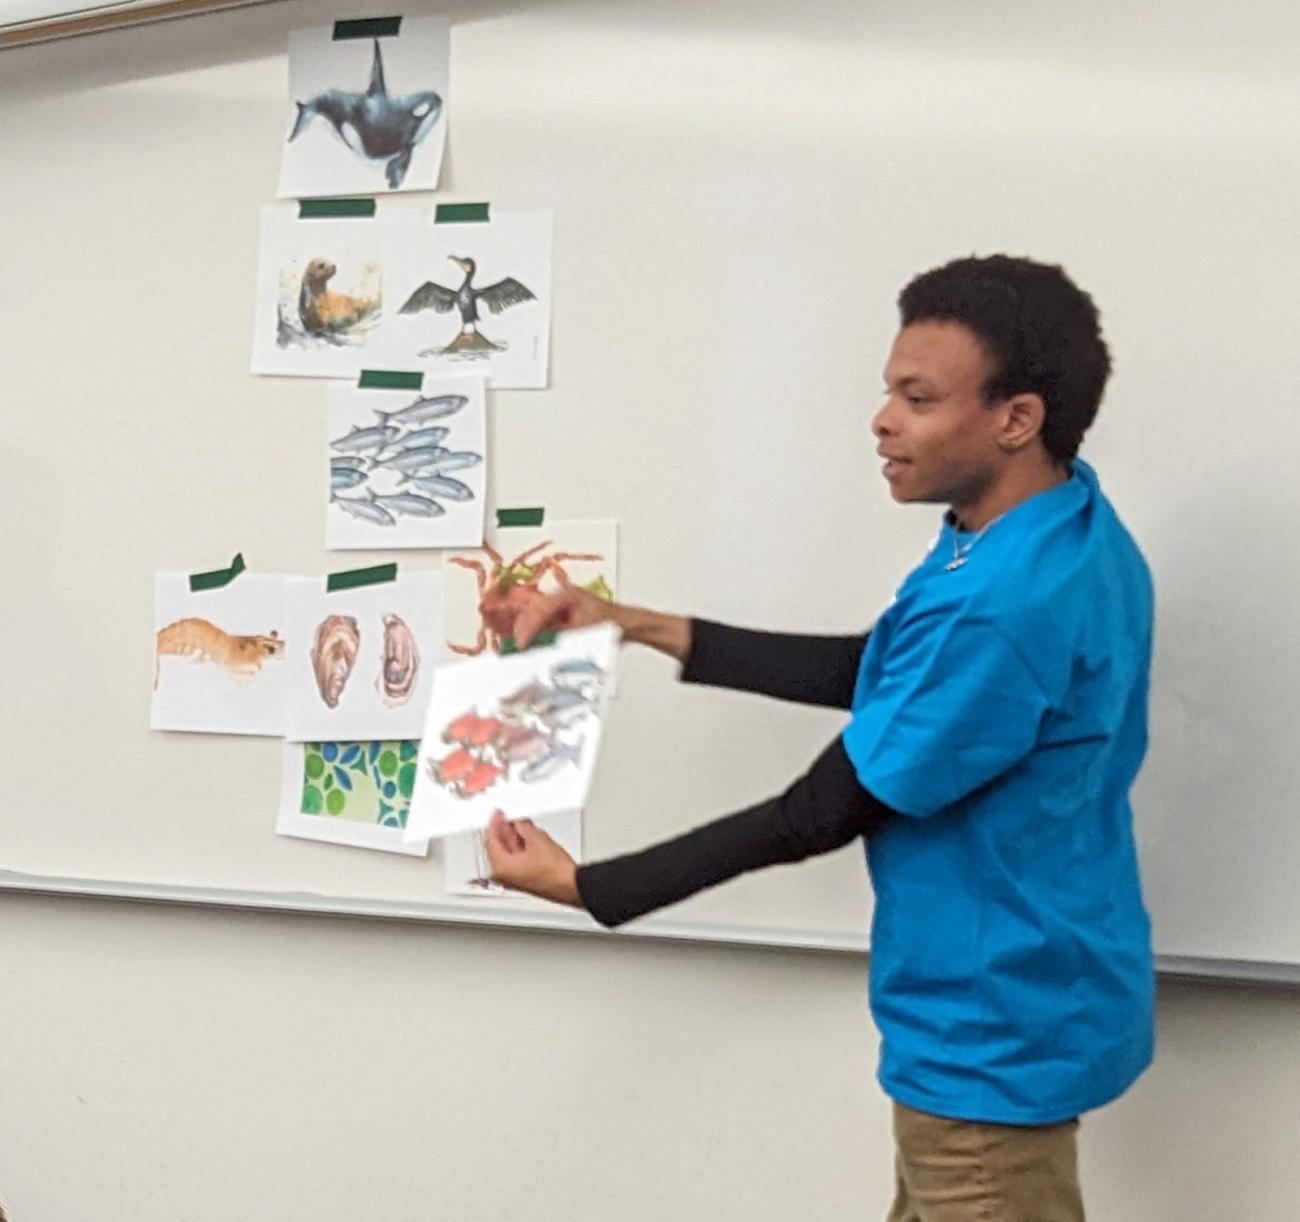 An Environmental Sciences student leads an exercise for 5th graders during Compass to Campus events on October 24.